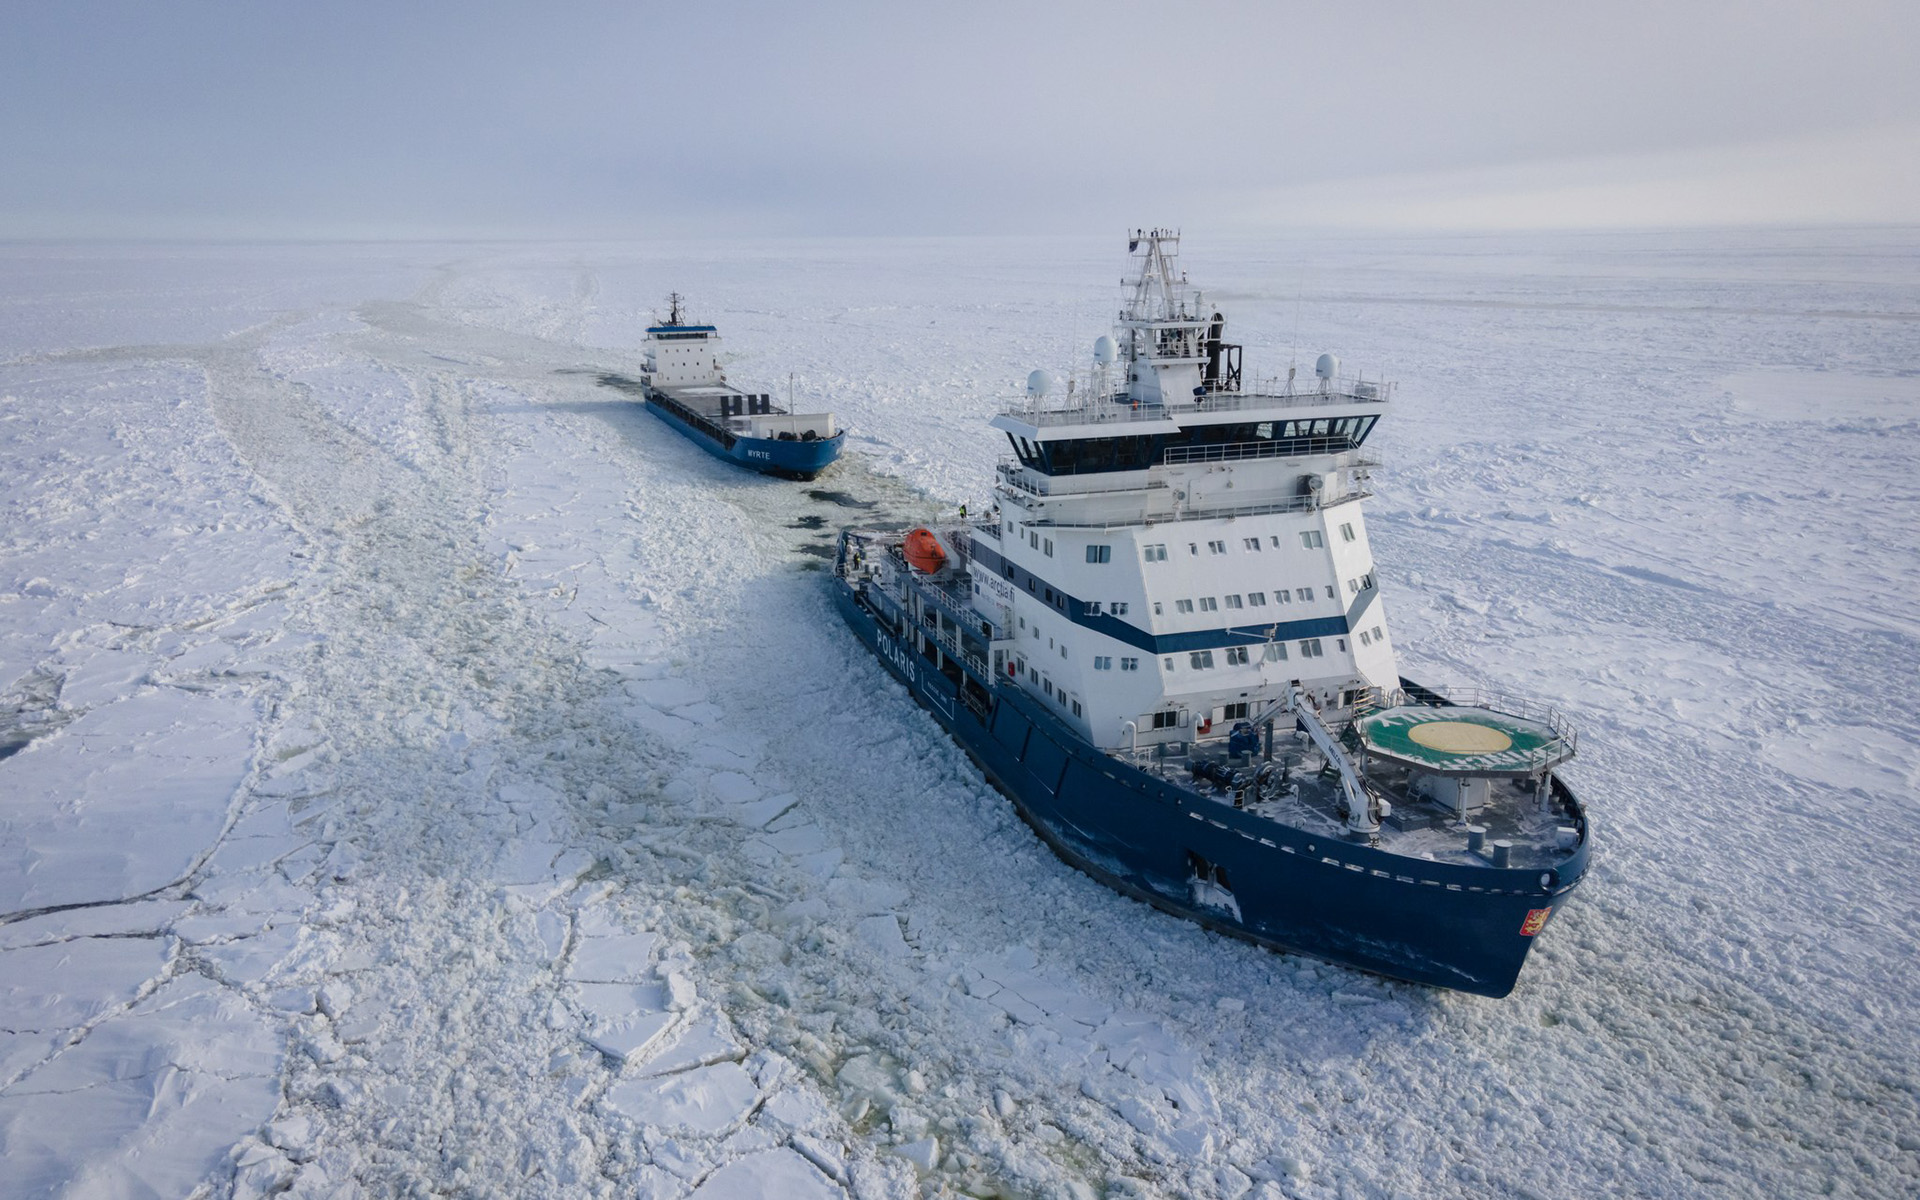 Icebreaker Polaris in action during the winter.